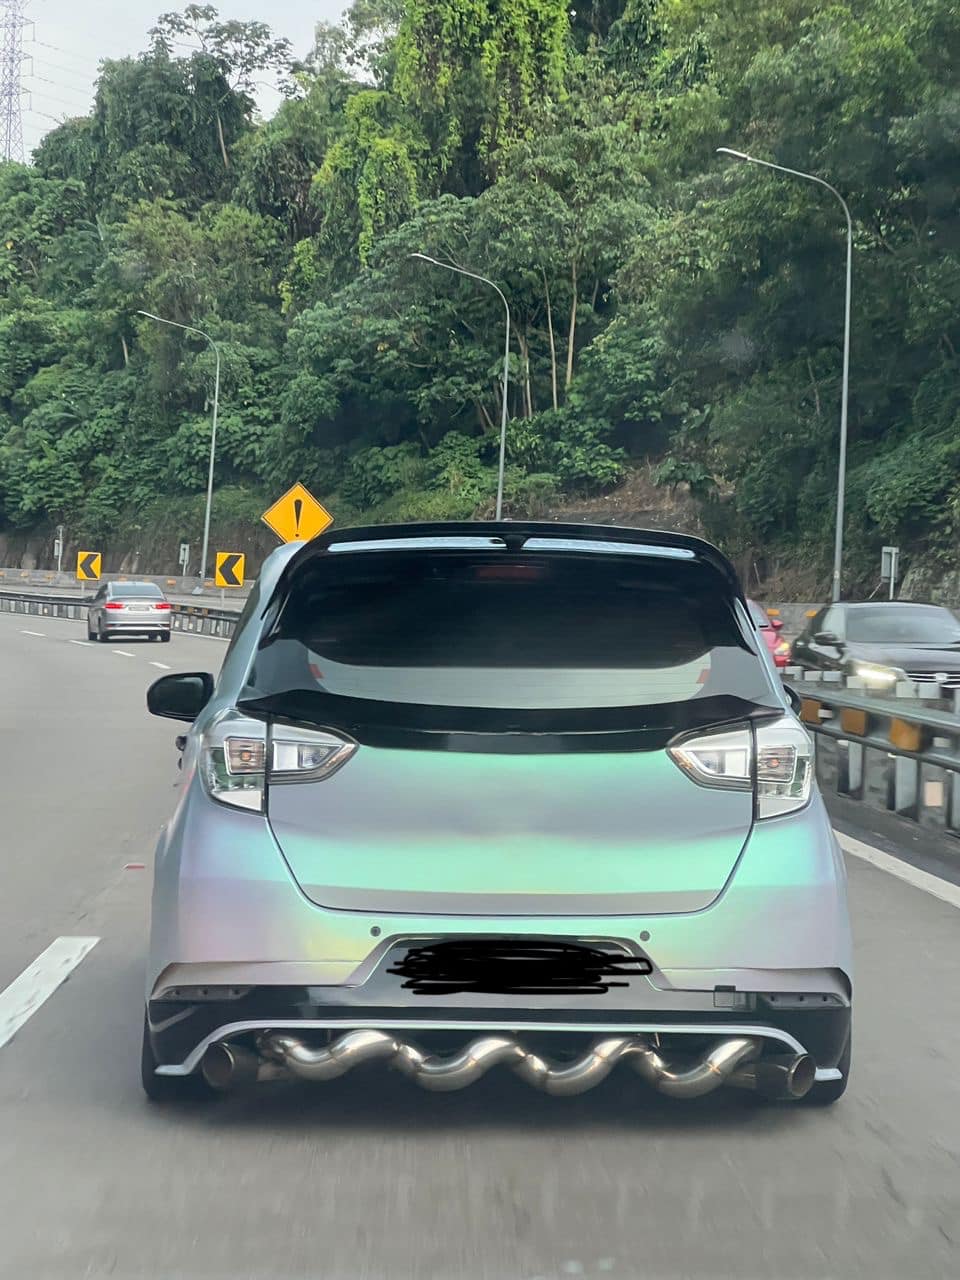 A car on road with spiral exhaust pipe